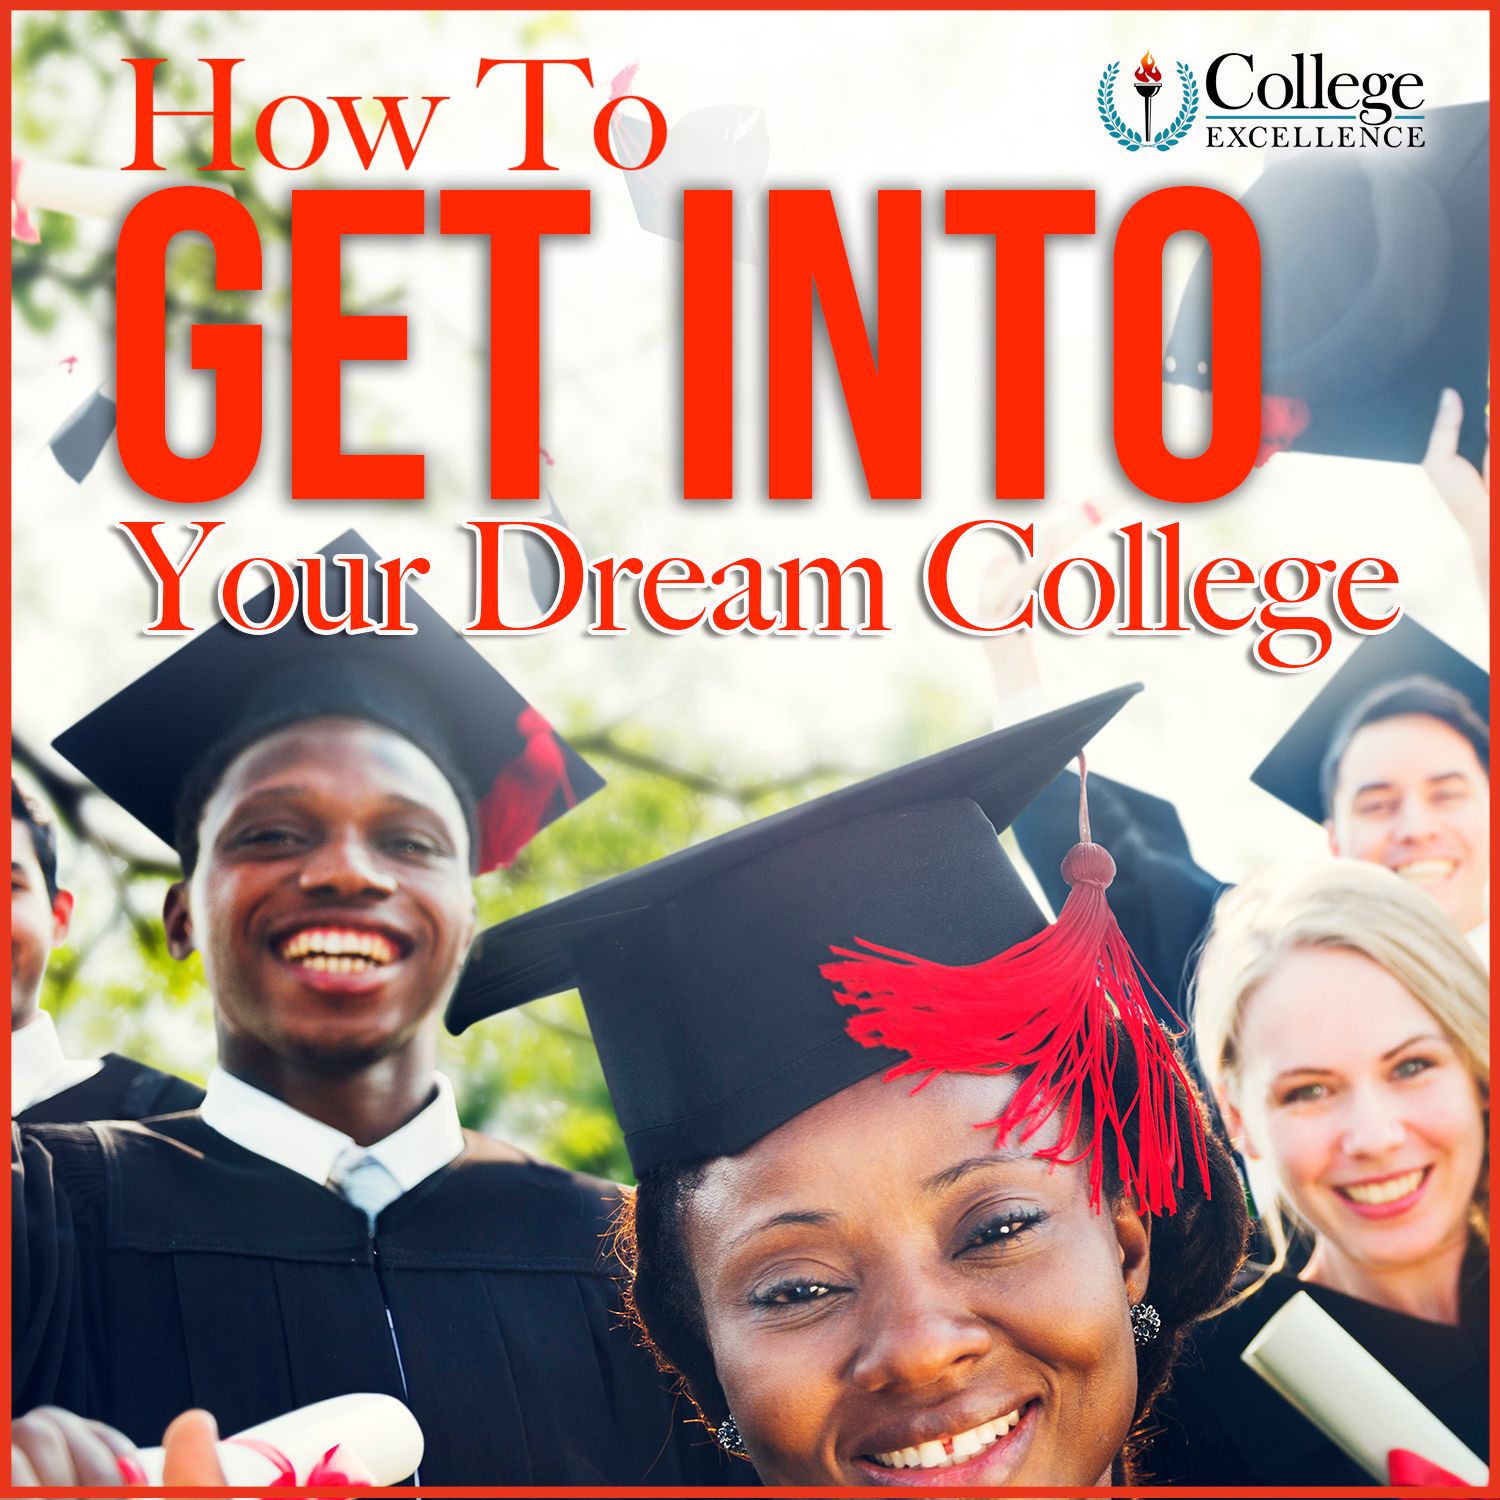 How To Get Into Your Dream College